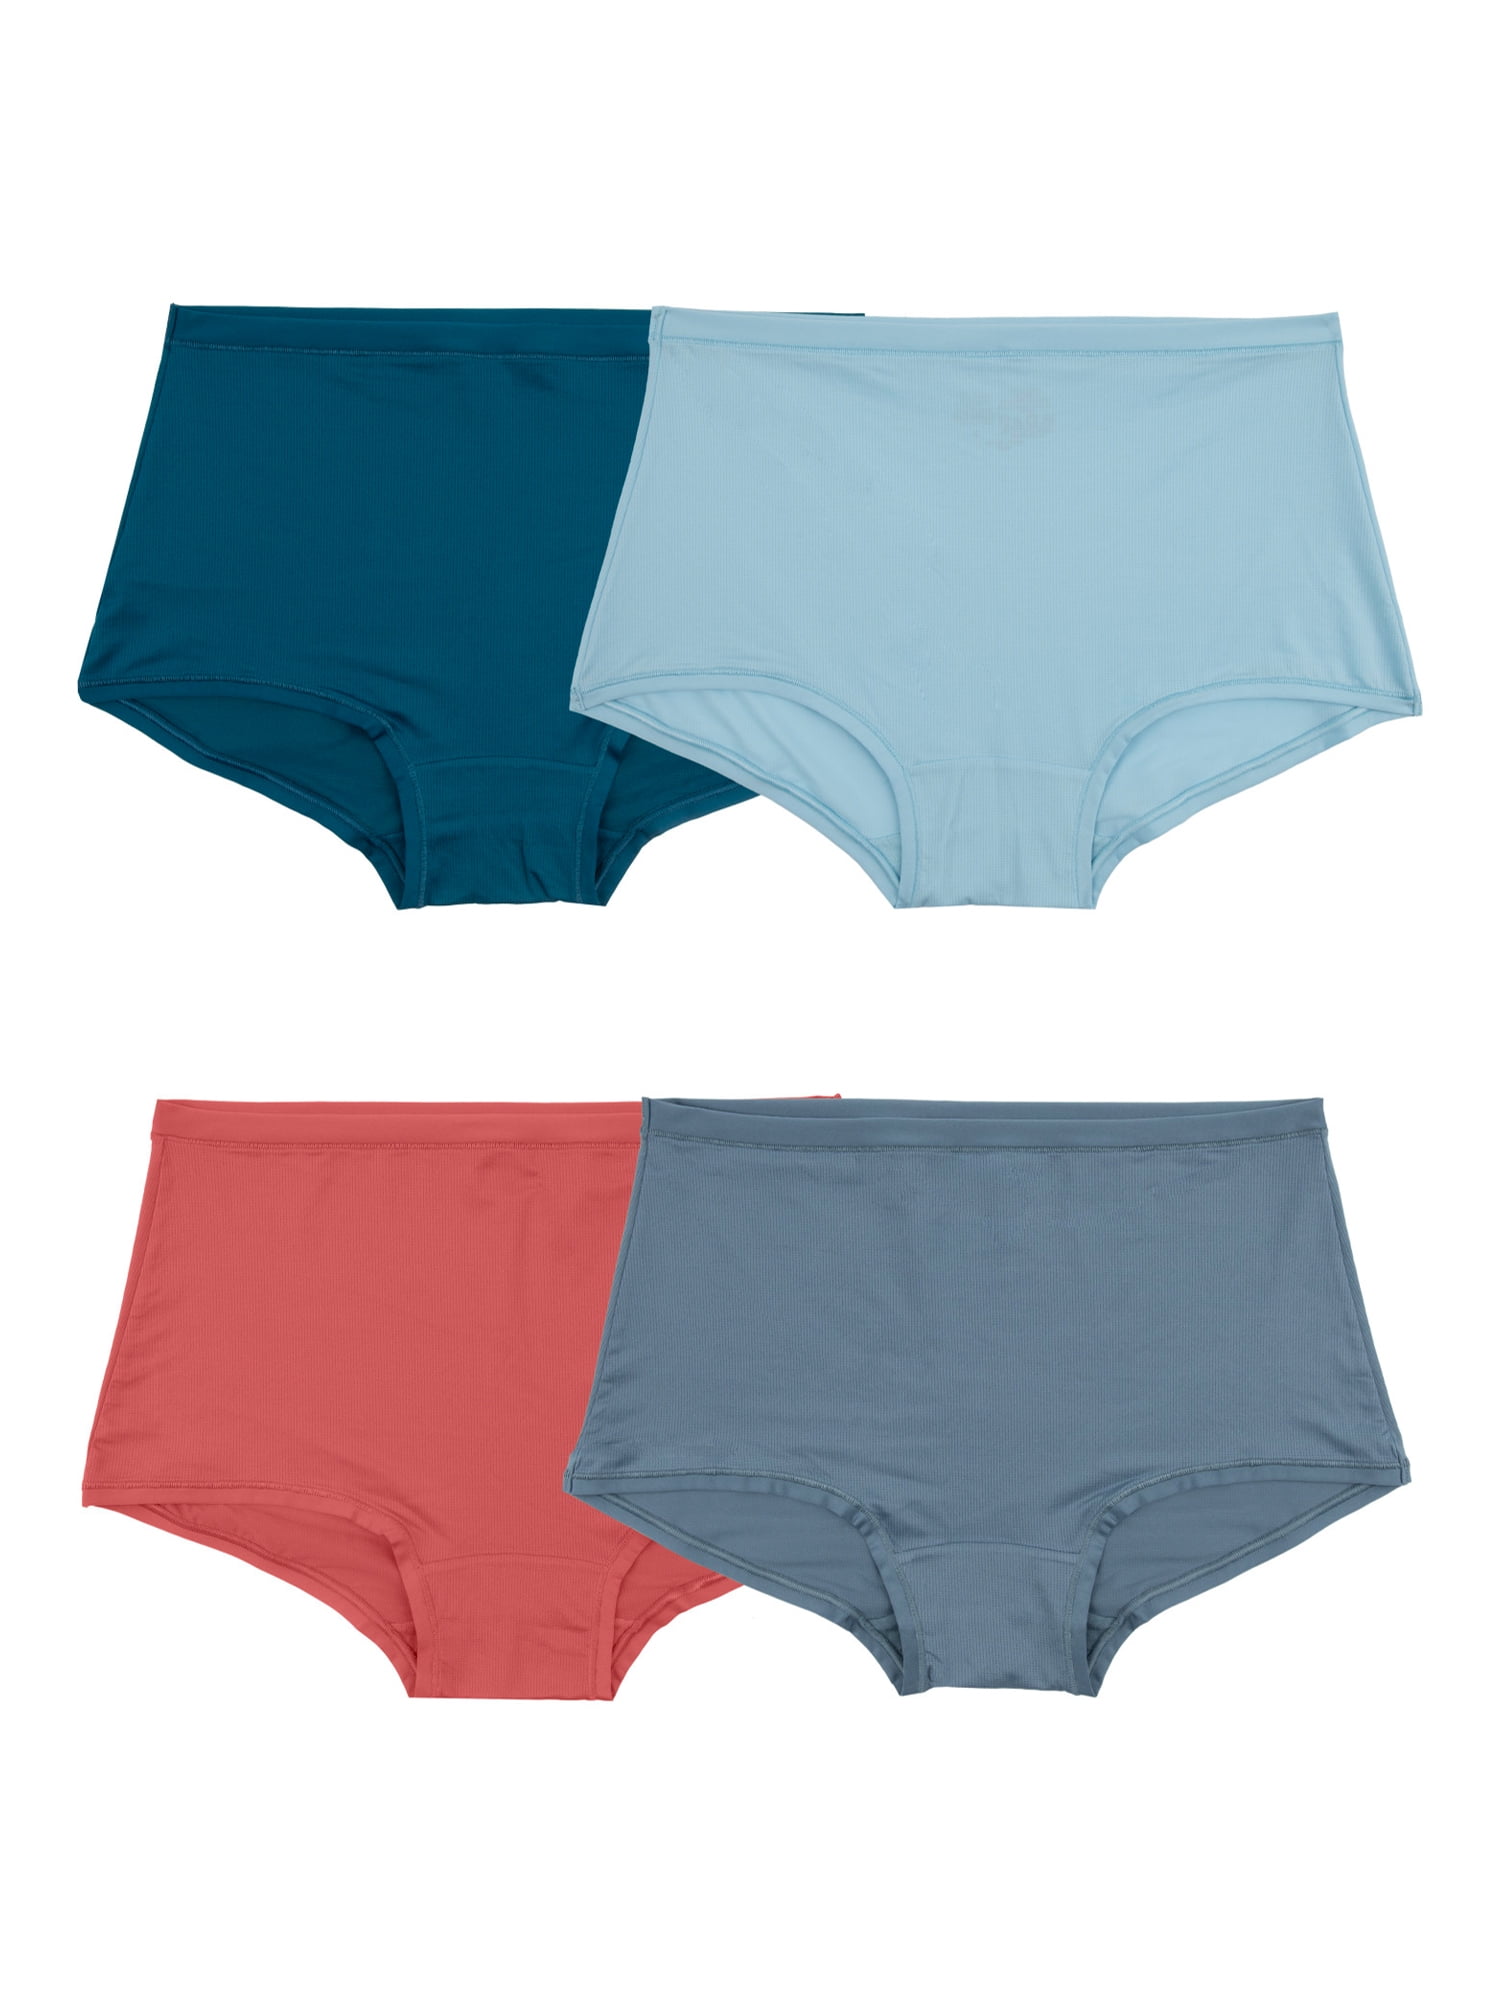 16 Pieces Fruit Of The Loom Women's Seamless Boy Shorts 3-Pack